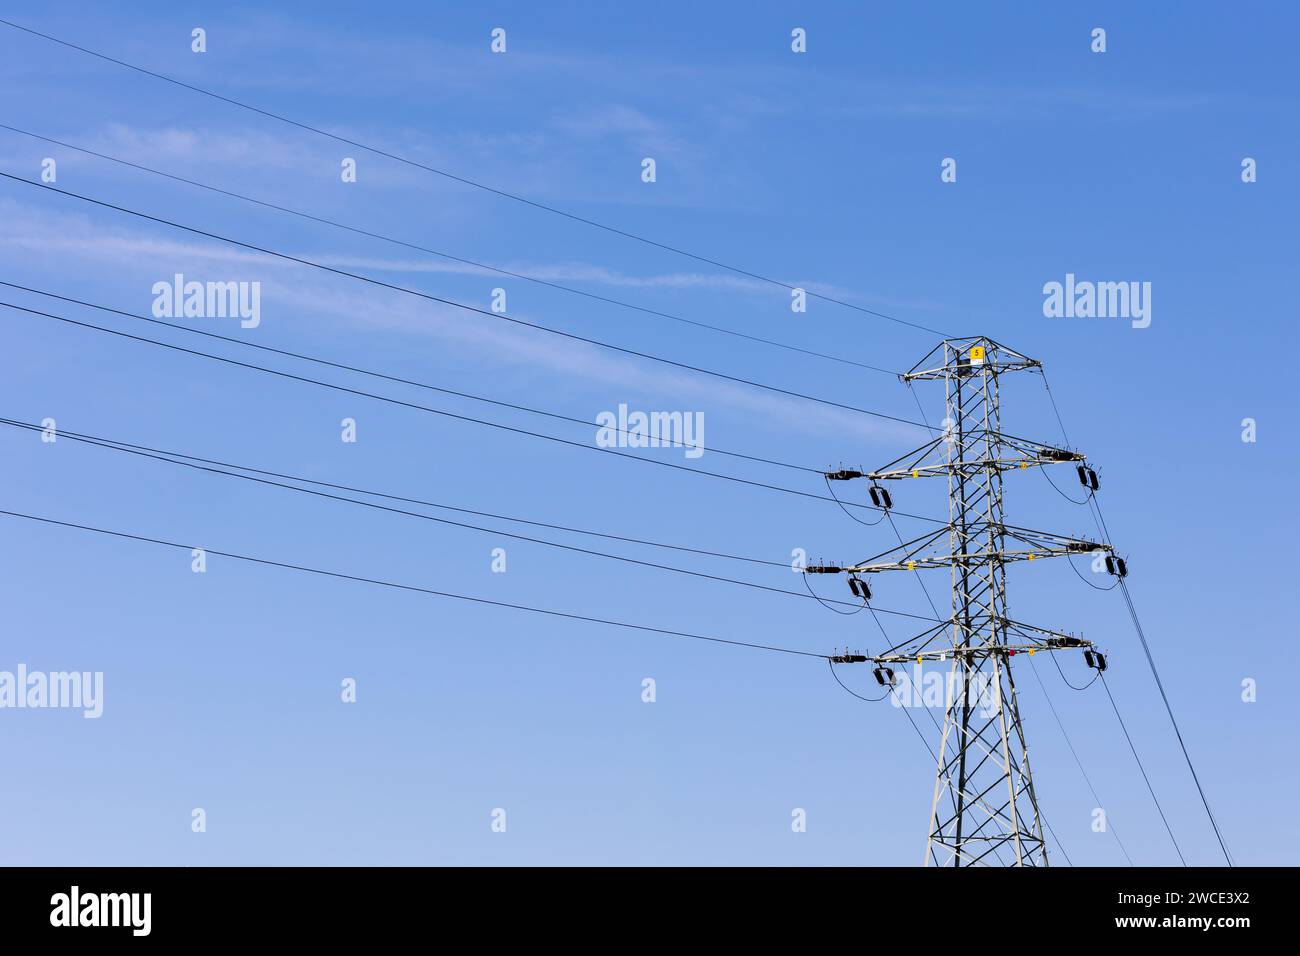 High voltage poles and high voltage cables against the background of the blue sky. Supply of electricity using overhead lines. Stock Photo